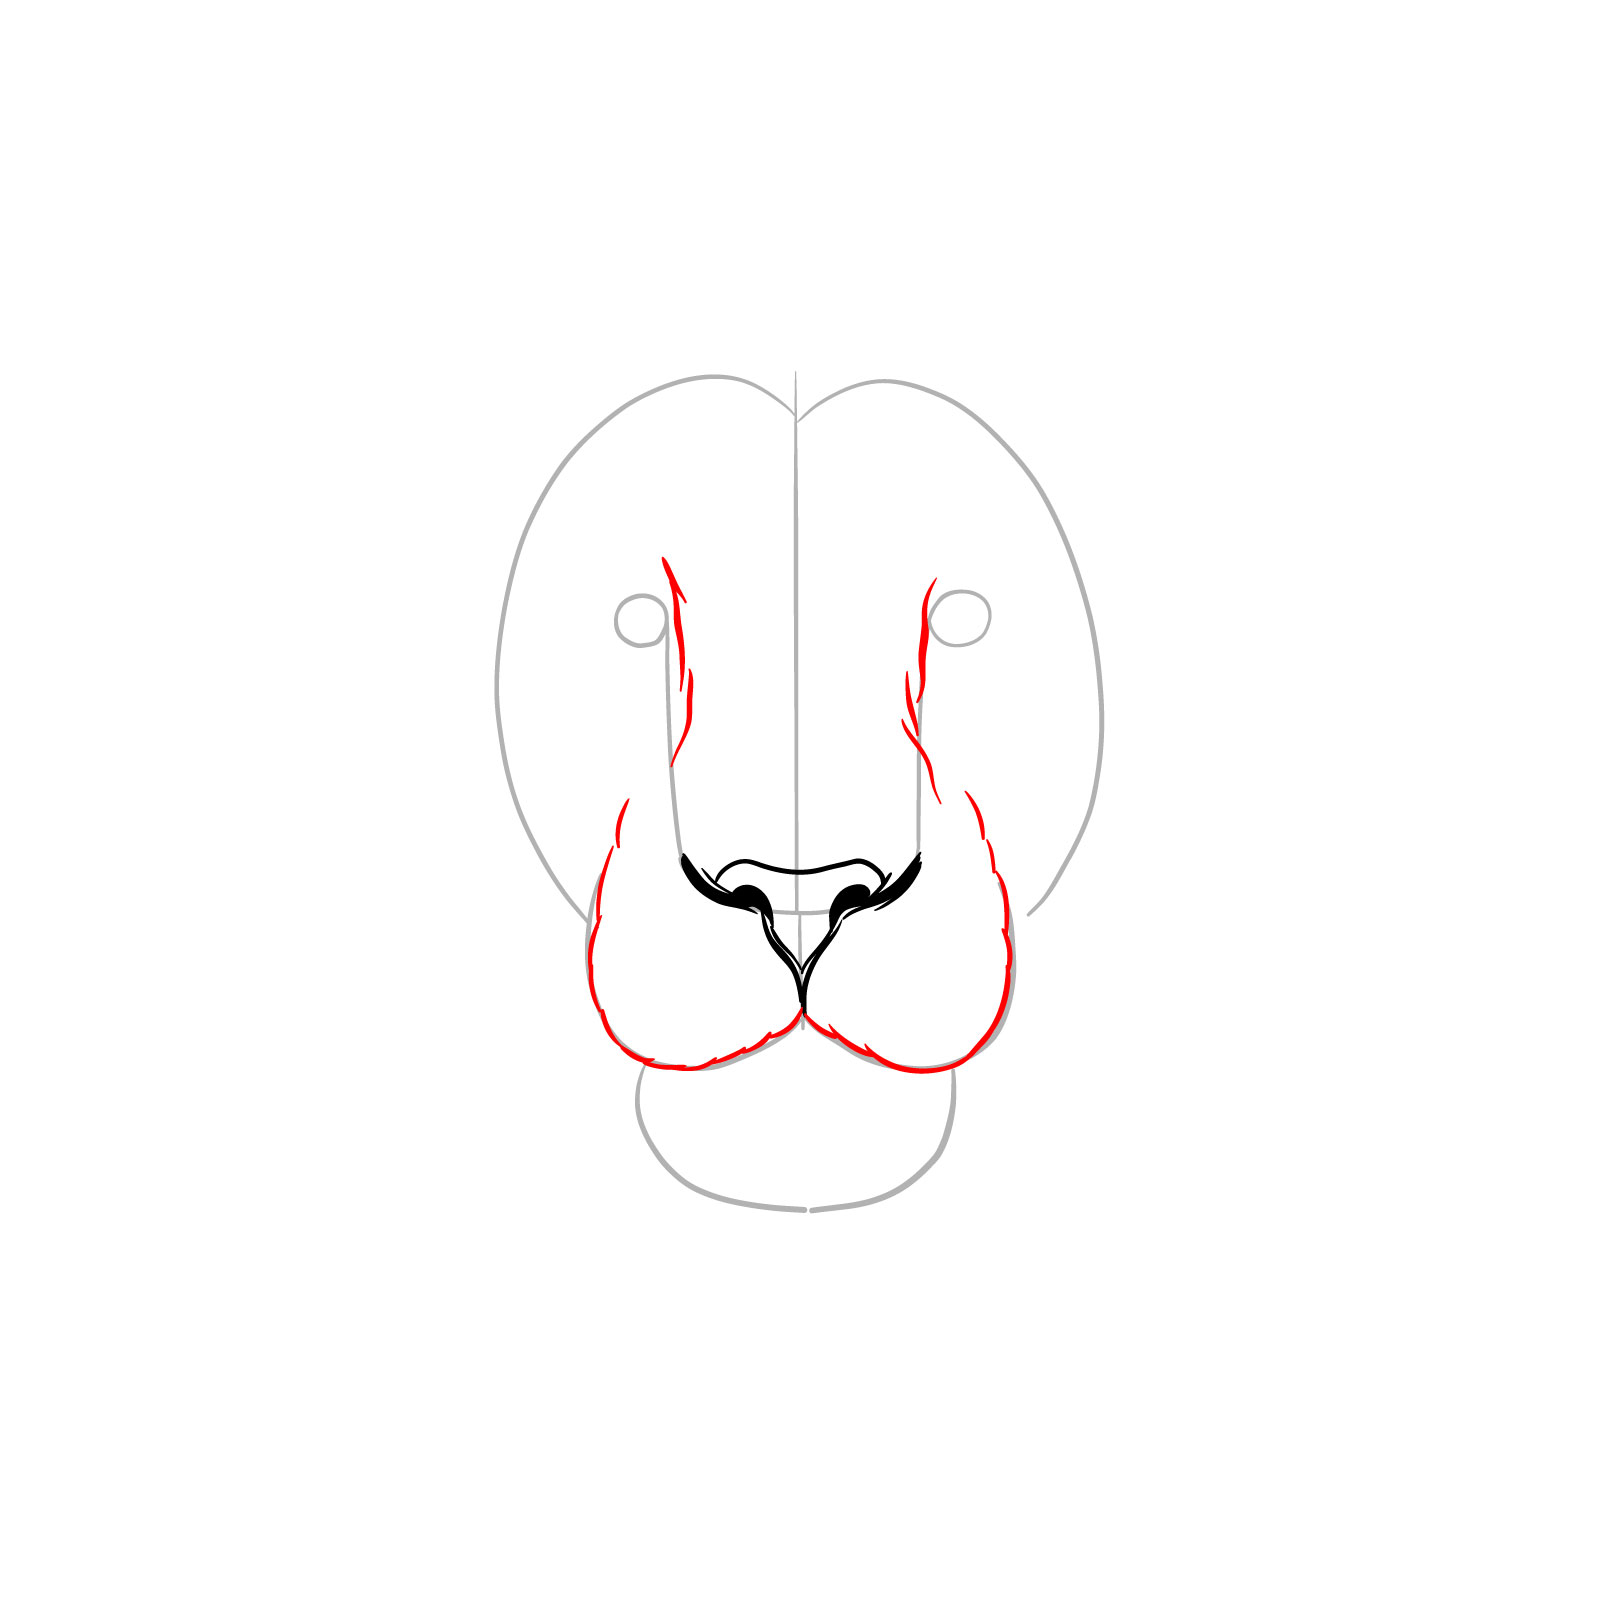 Outlining the muzzle of a lion's face front view - step 04